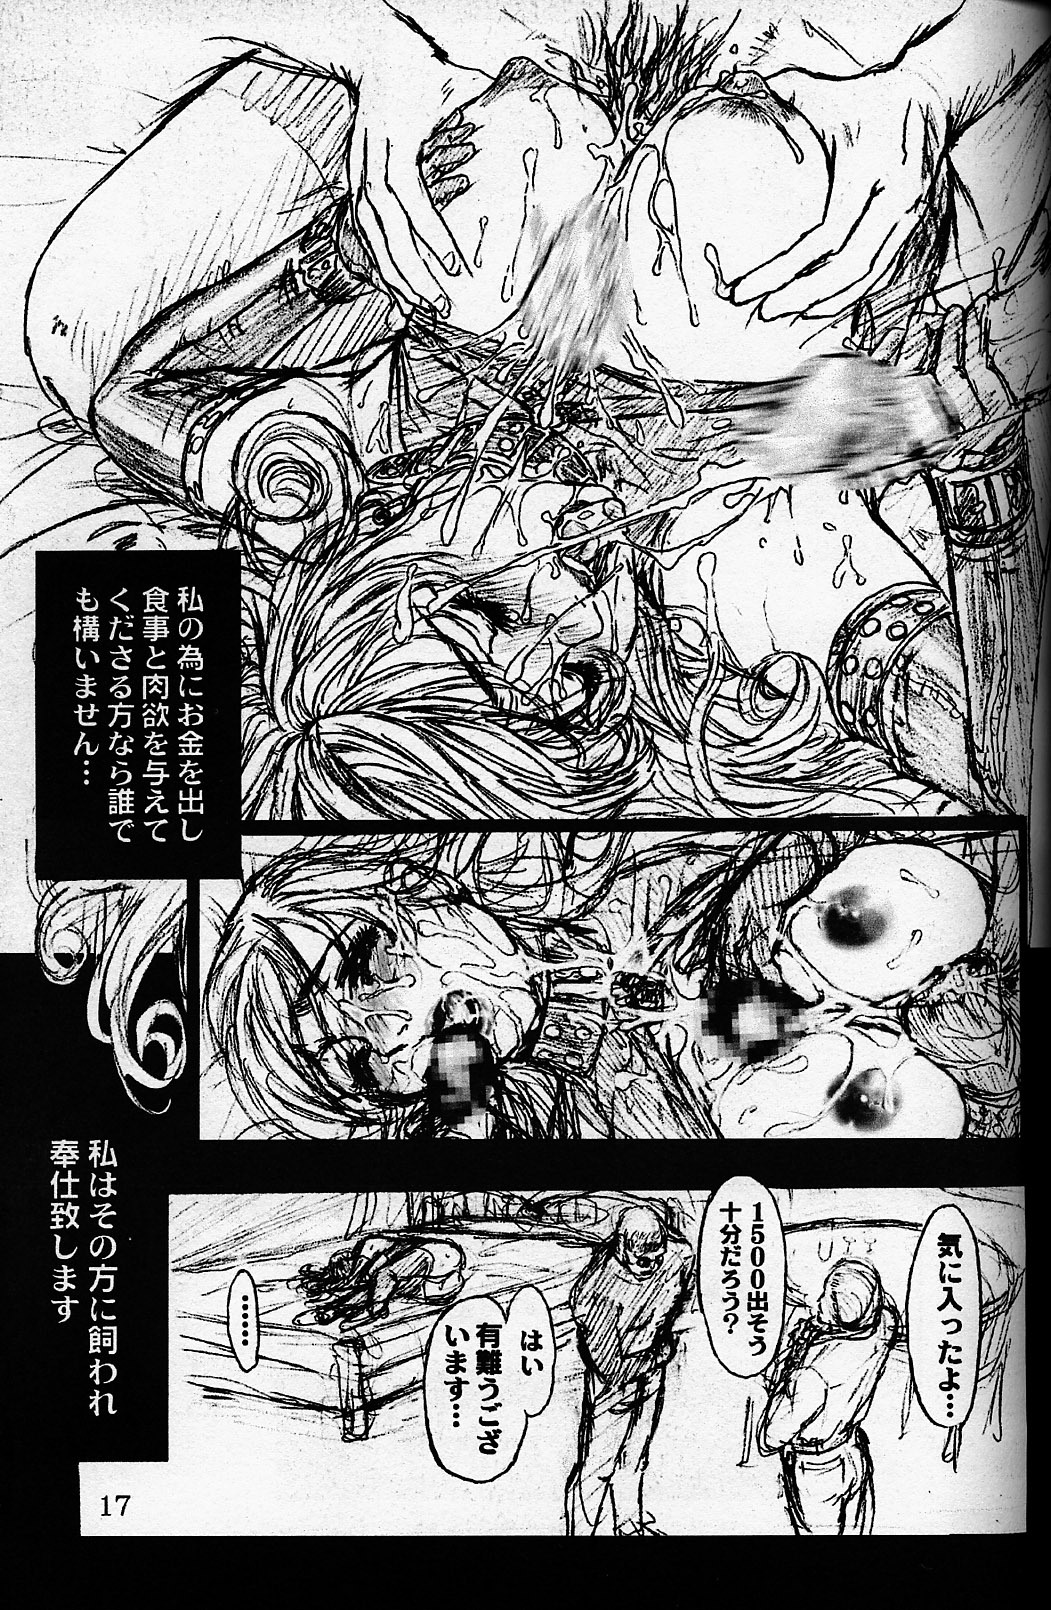 [Studio NEO BLACK (Neo Black)] The Slave Plus One Revised Edition page 16 full